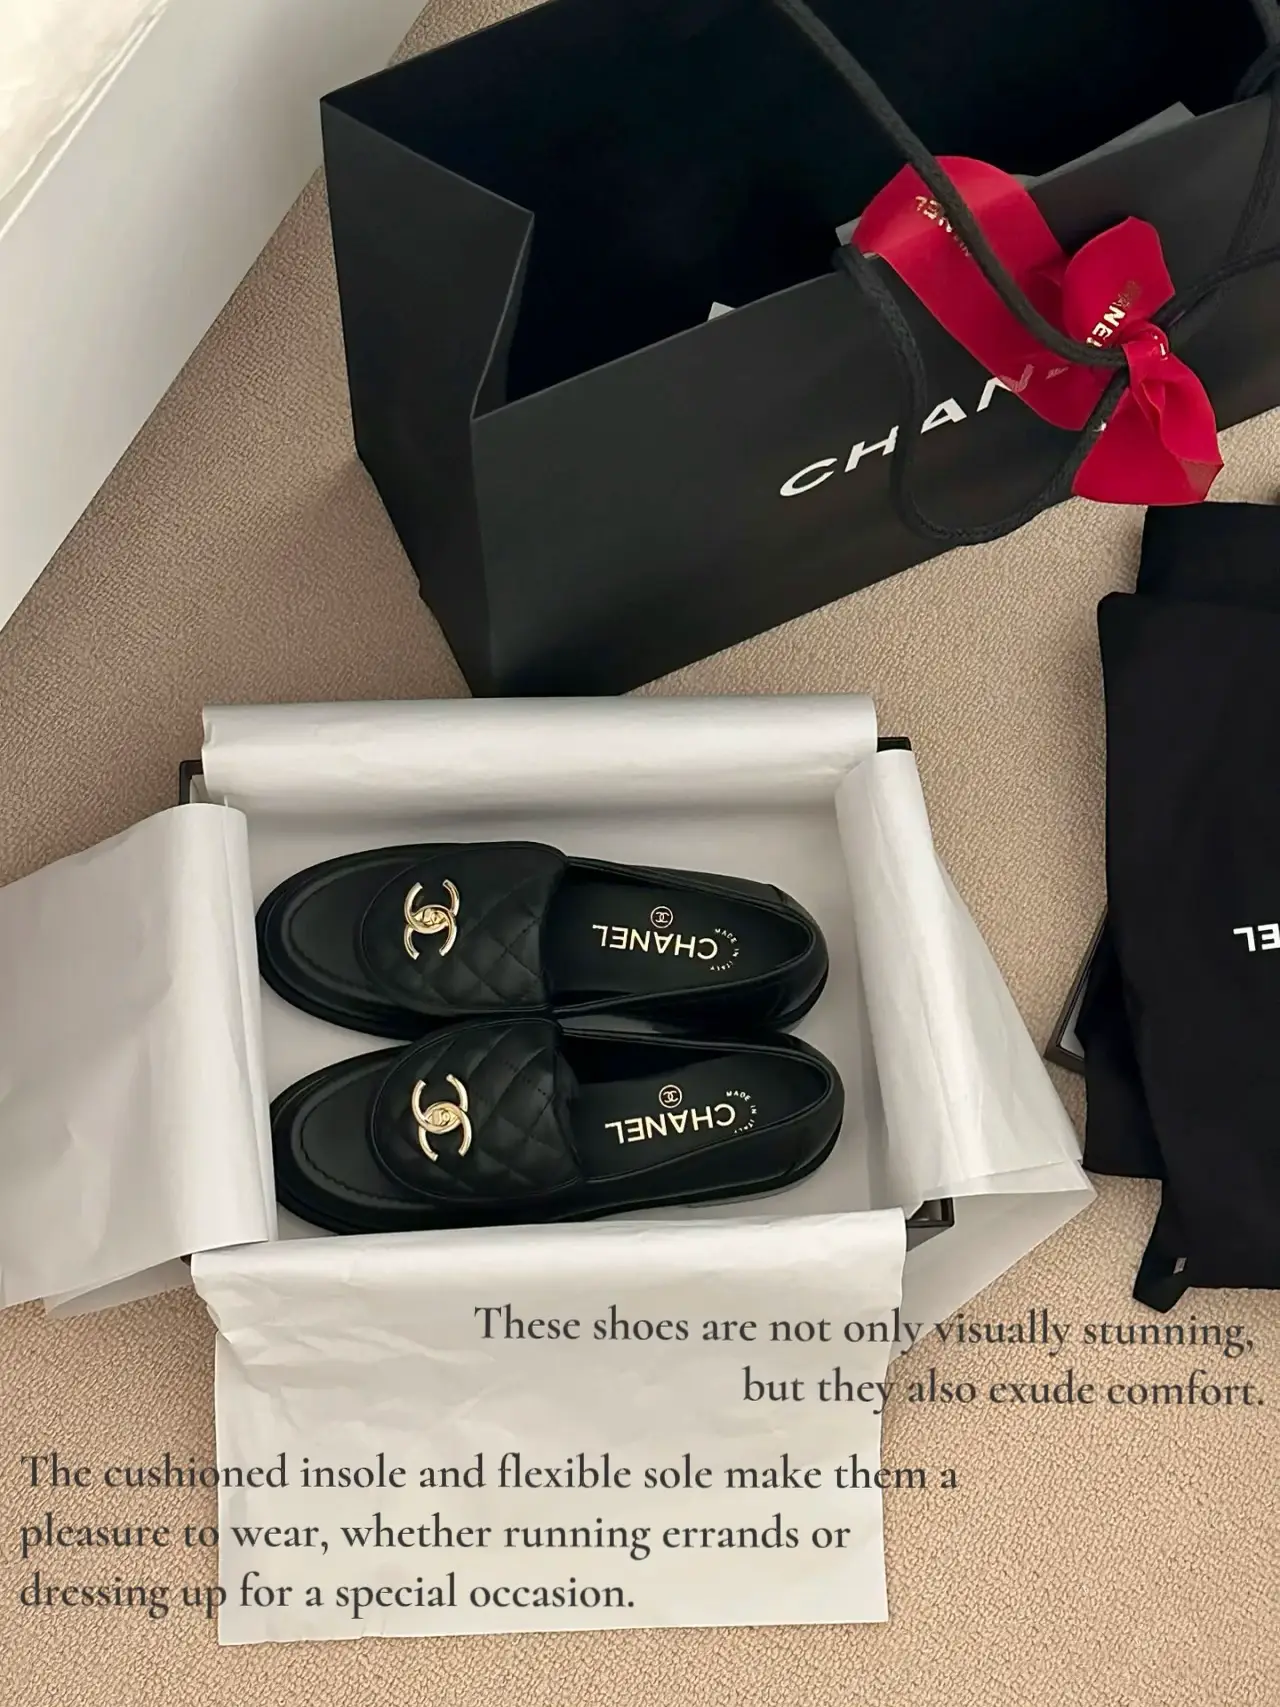 Unbox My Toga Pulla, Black Sabot Loafers, Video published by Rihanye